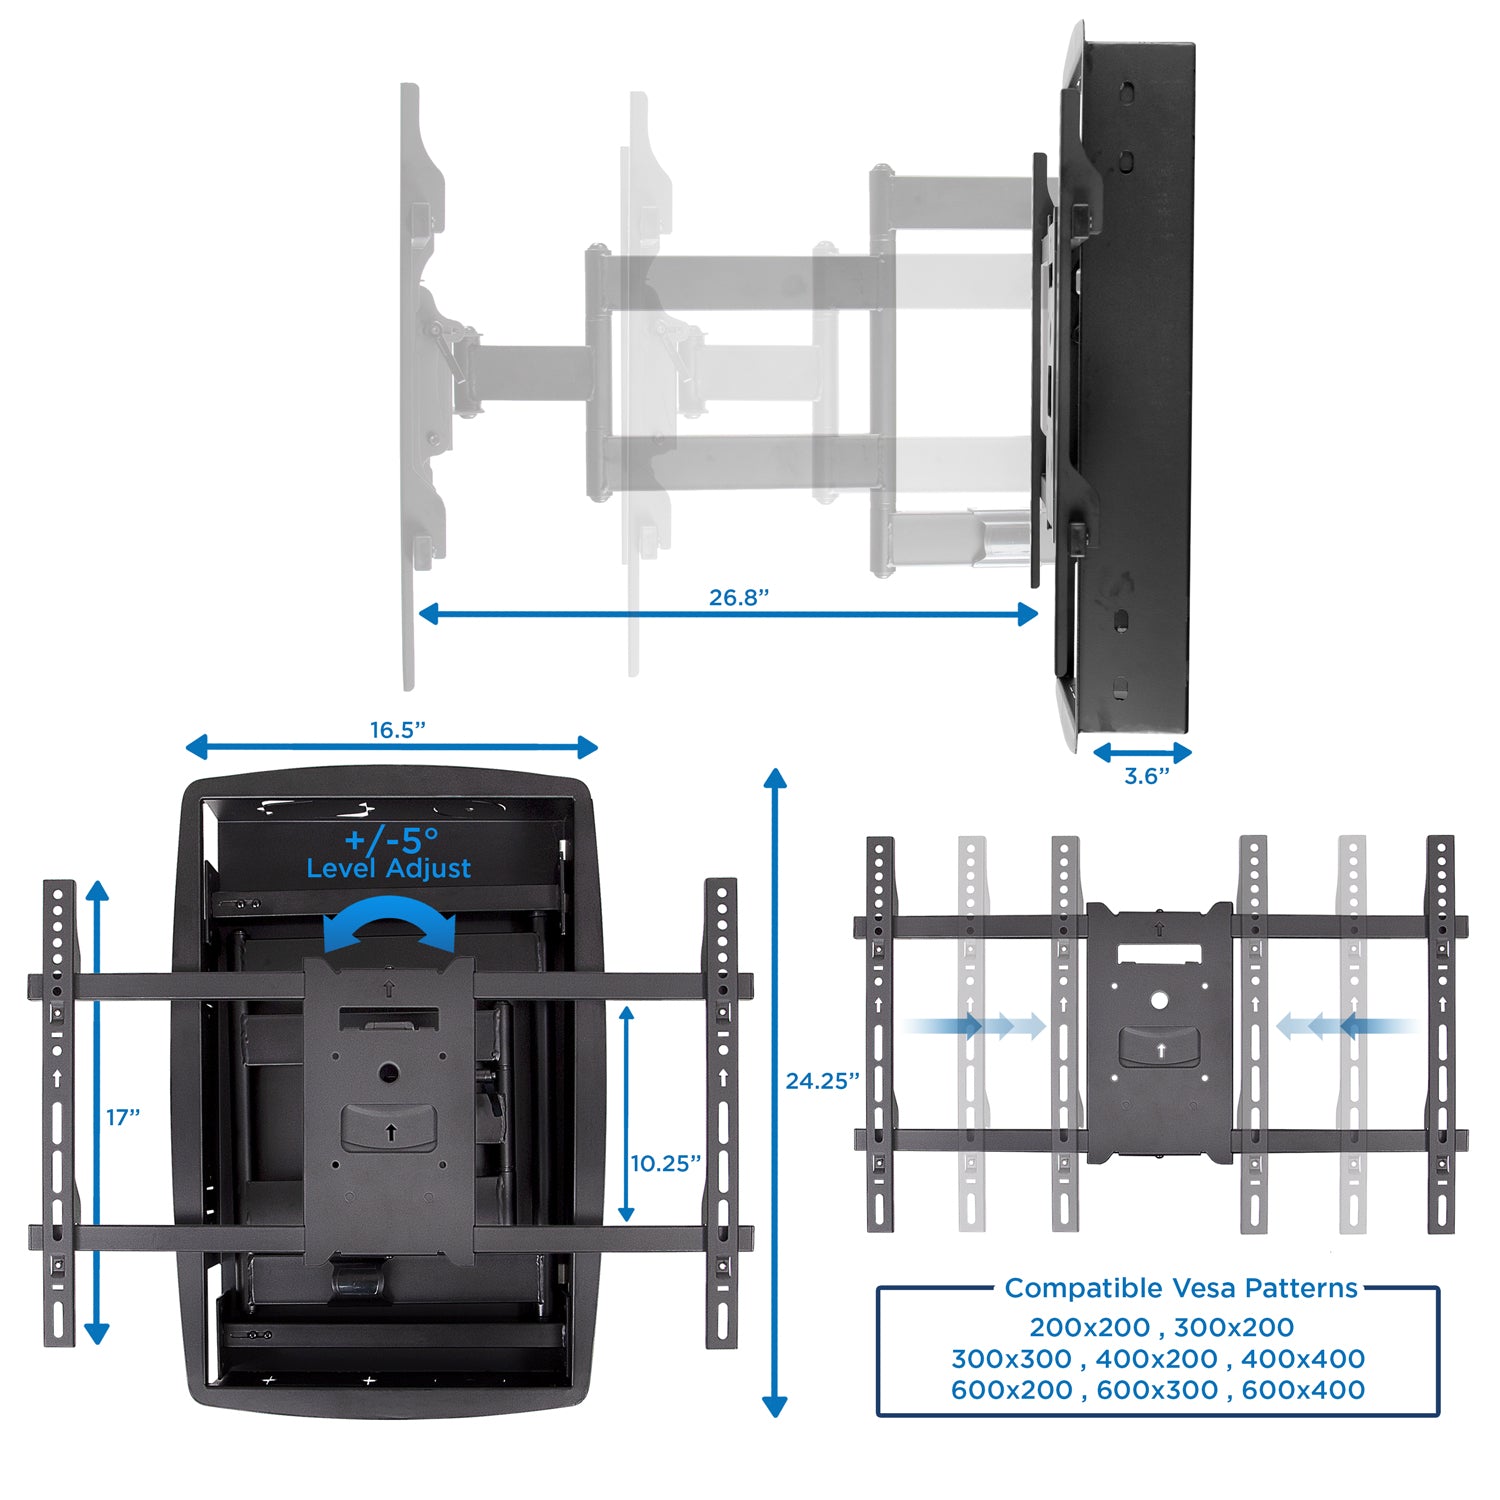 Recessed Long-Extension Wall Mount